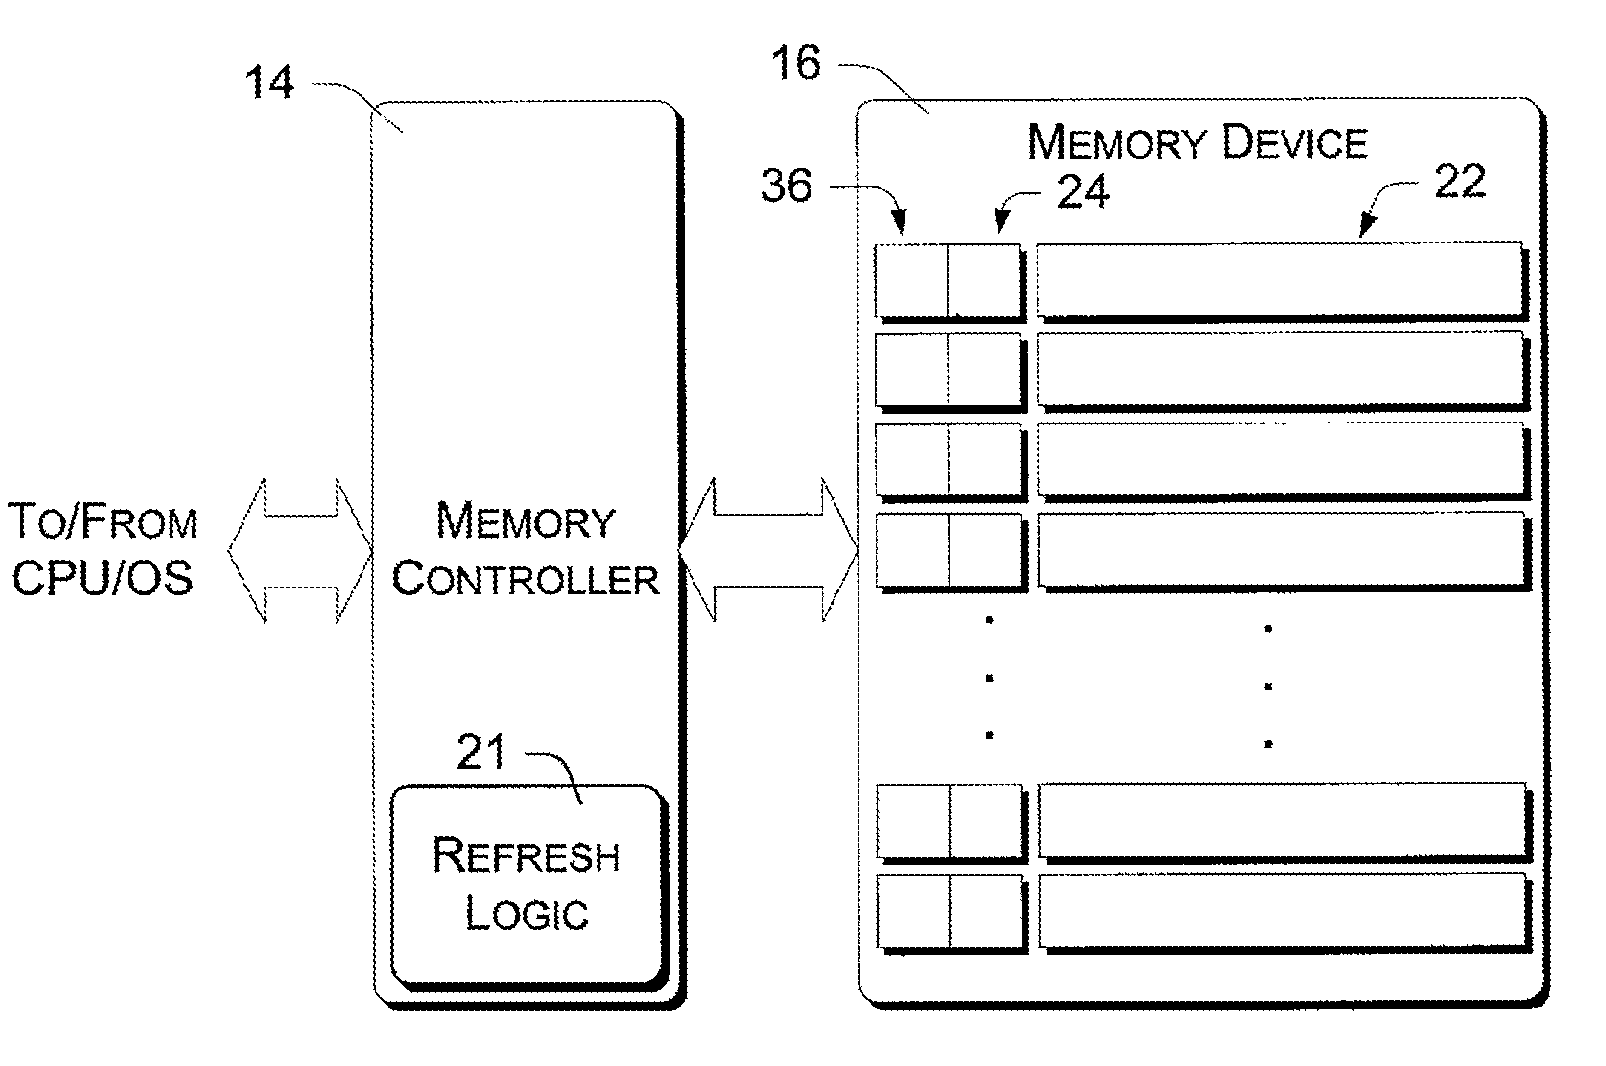 Redistribution of memory to reduce computer system power consumption